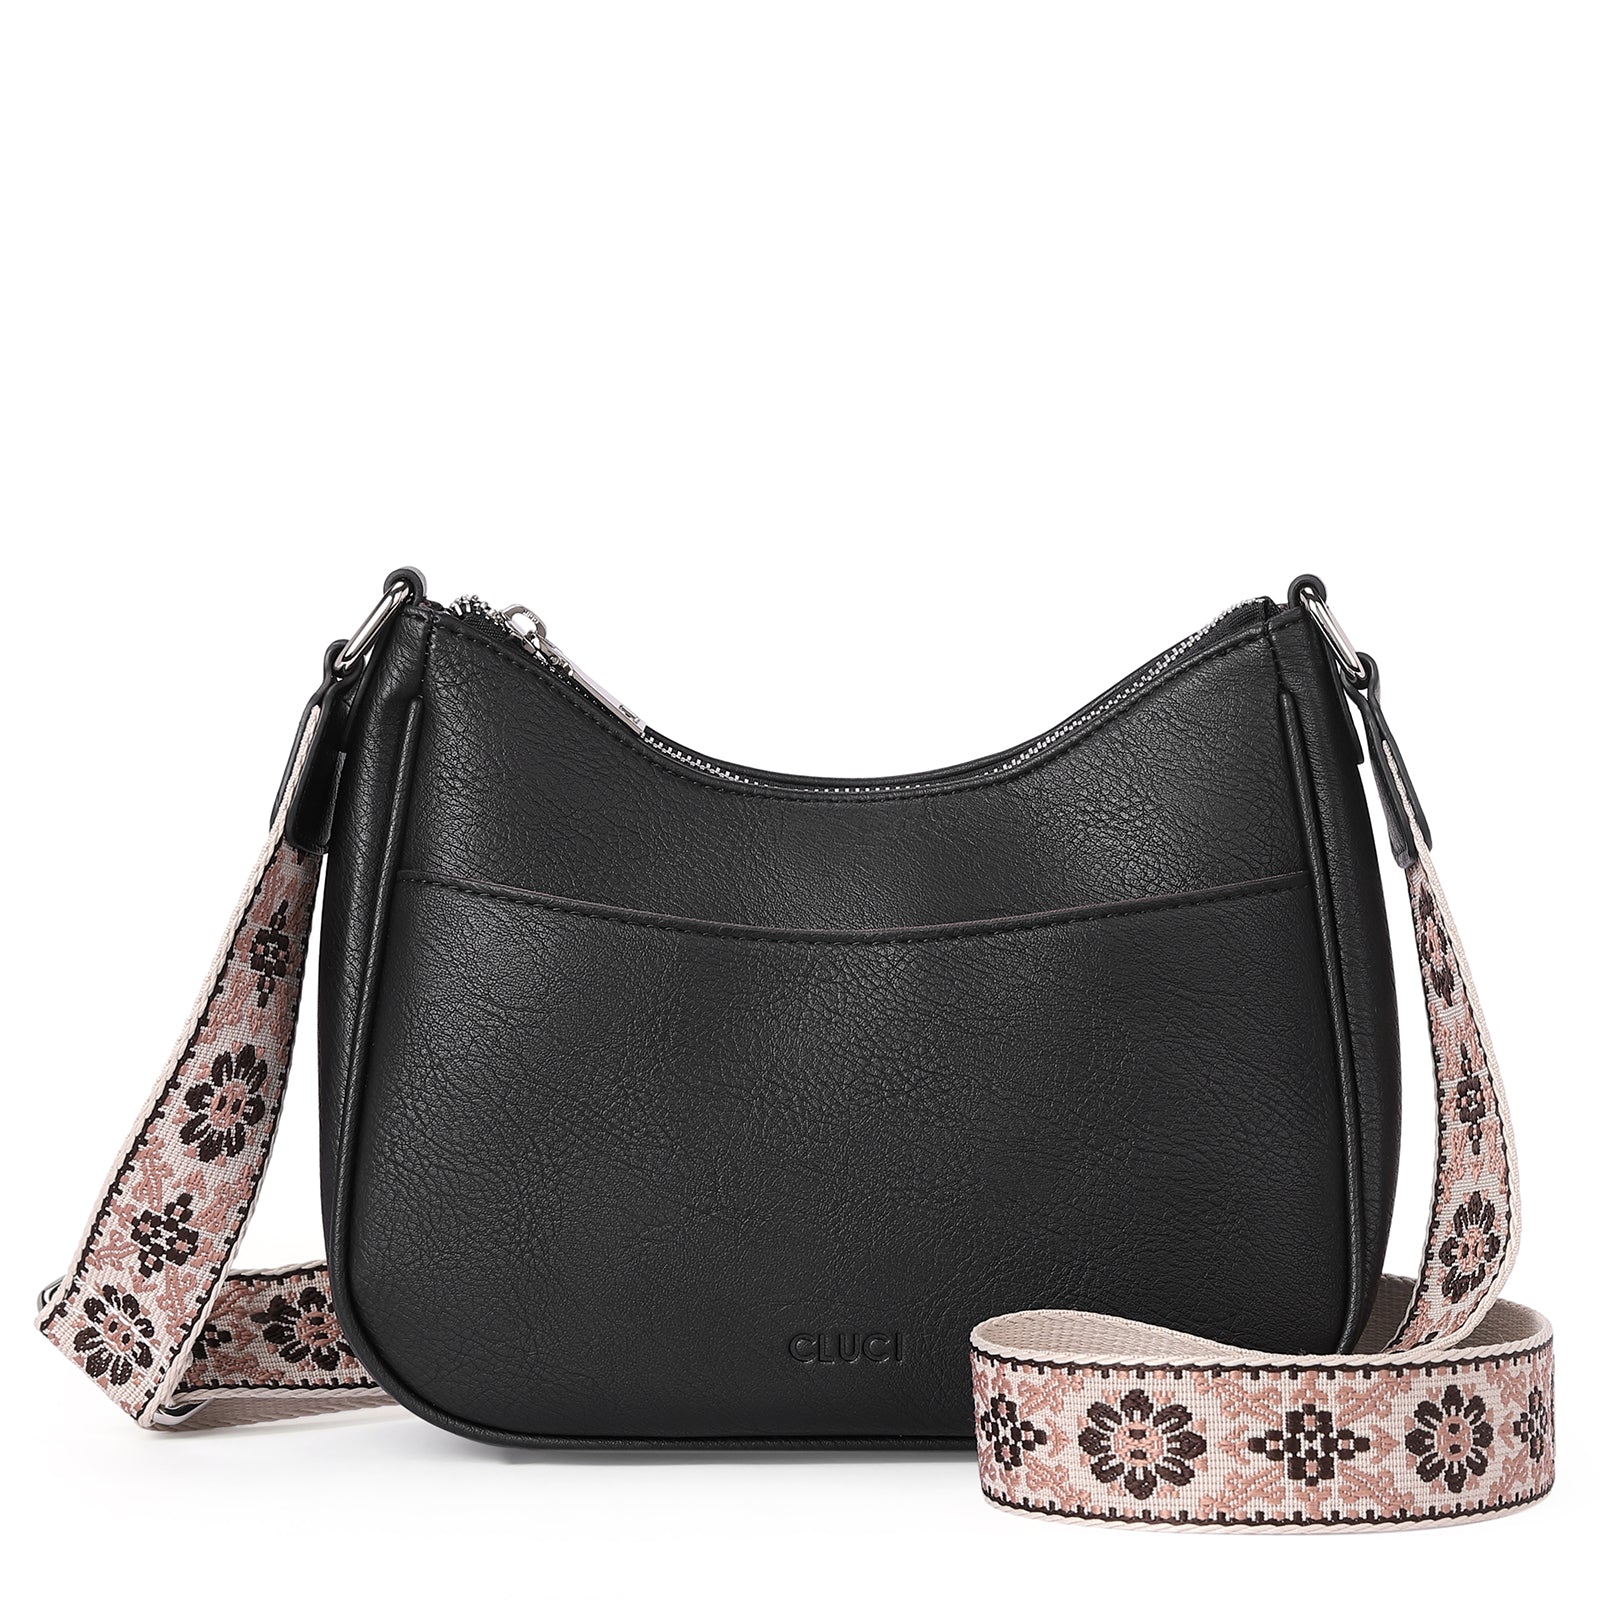 Trendy Crossbody Purses for Women with Adjustable Strap